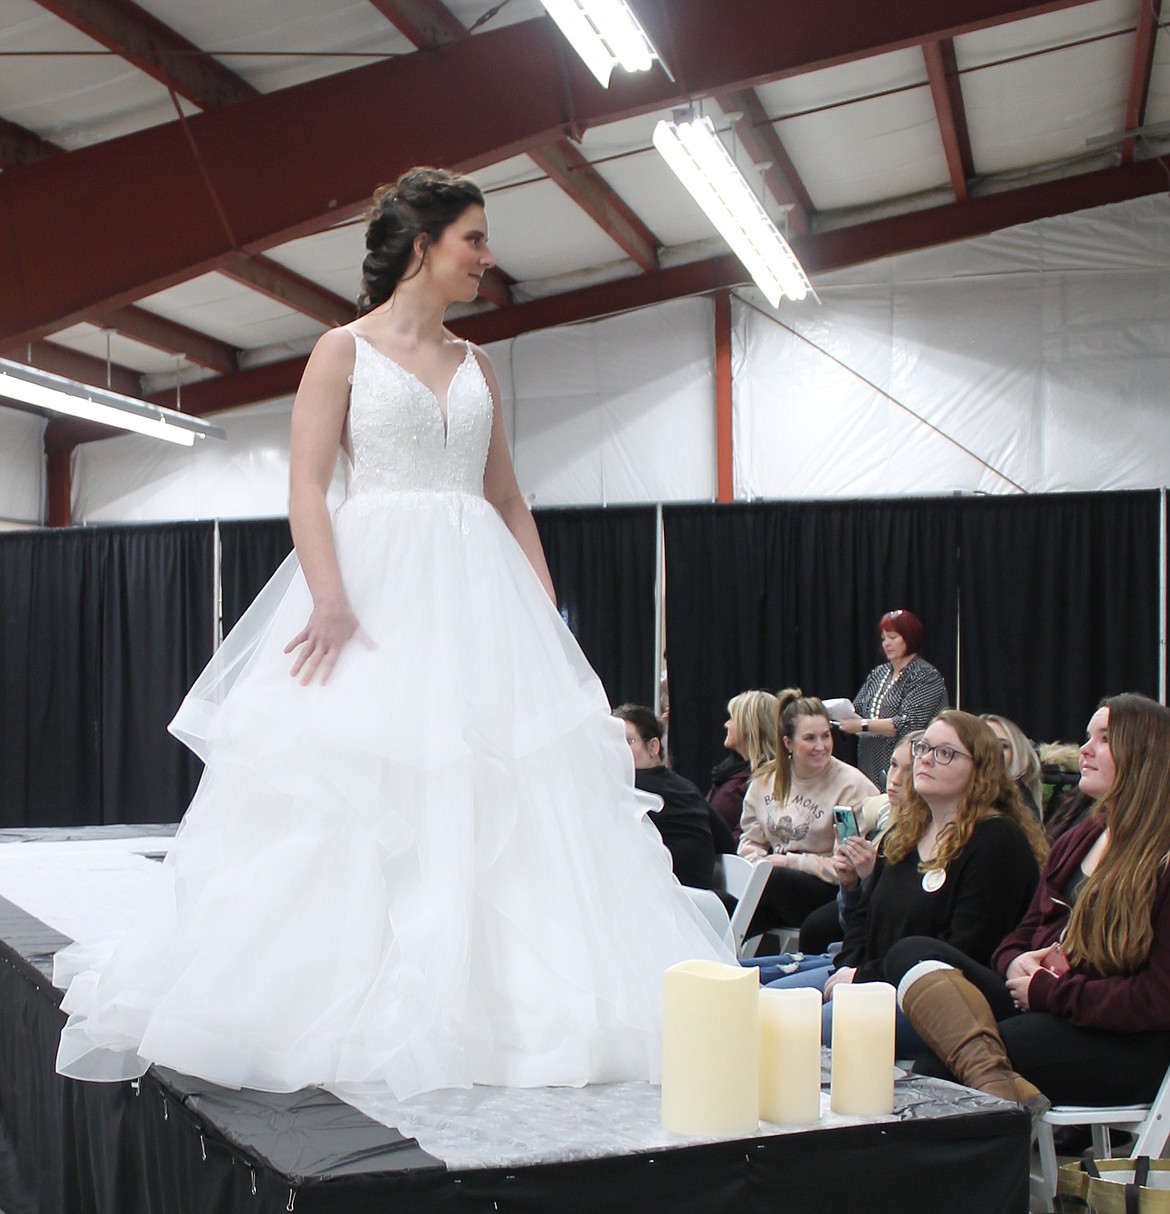 Megan Washburn shows off a Cocomelody bridal gown at the Enchanting Bridal Show Saturday at the Grant County Fairgrounds.